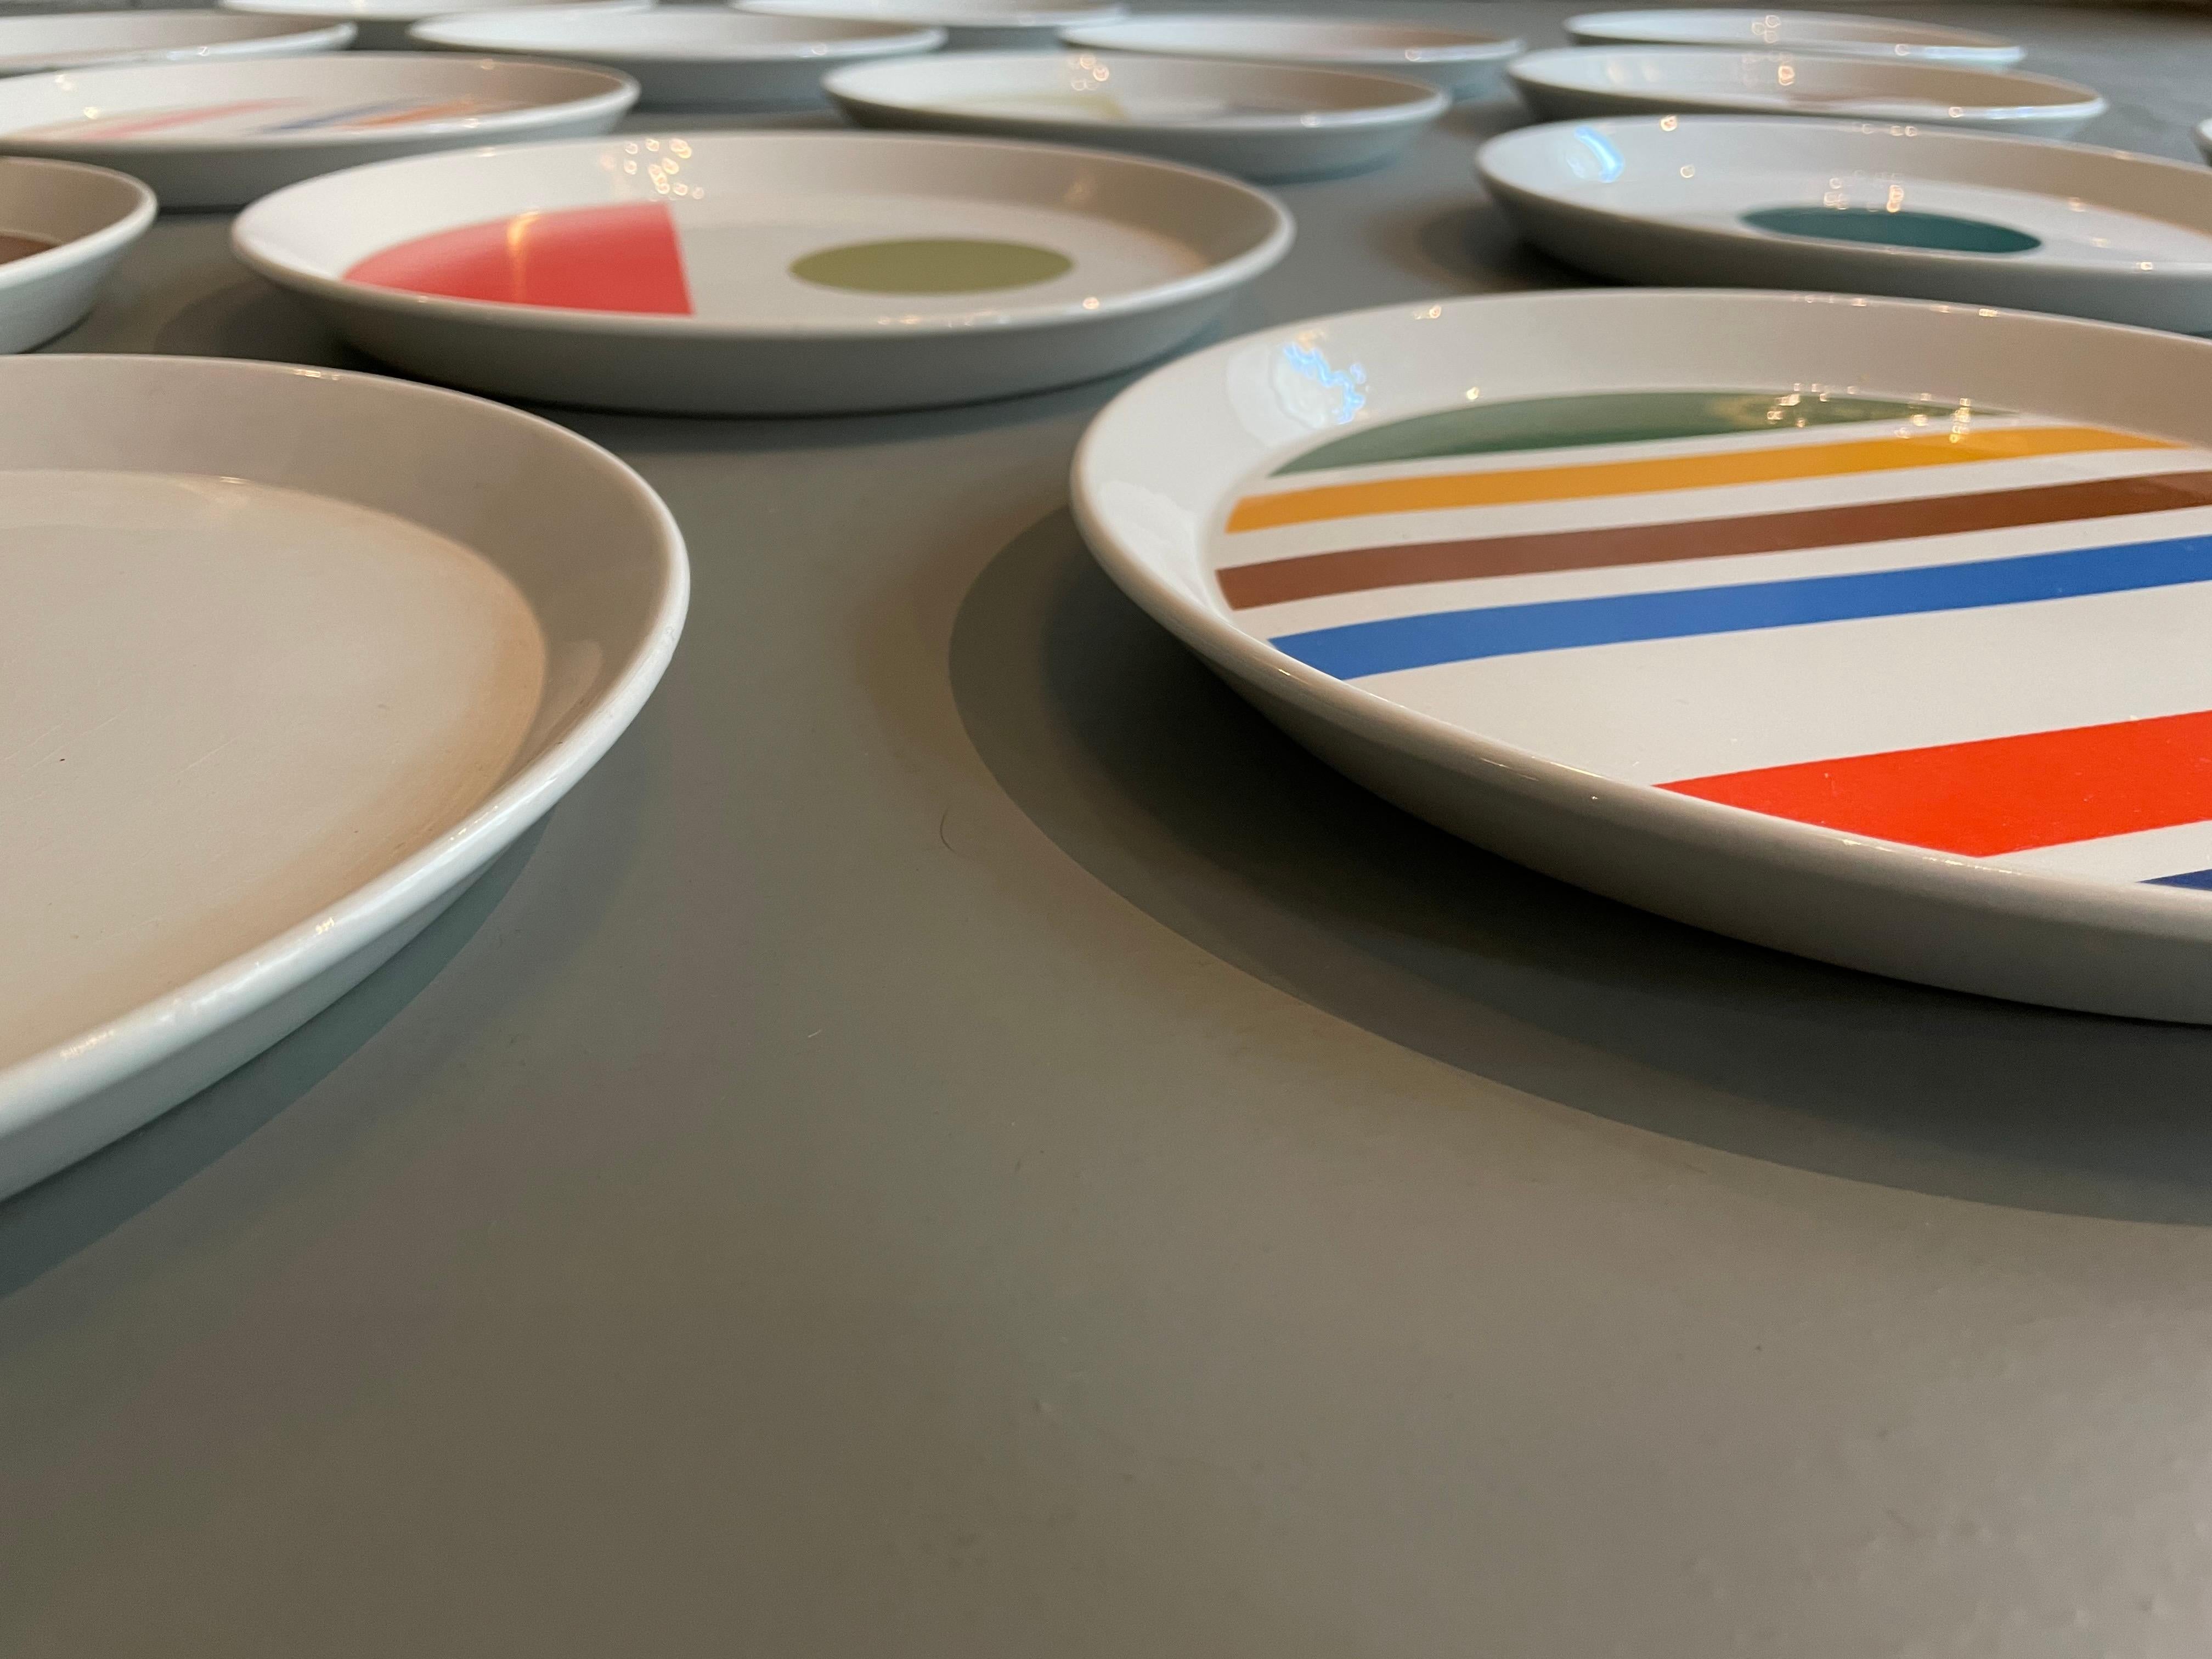 Silk-screened and glazed ceramic plates designed by Gio Ponti as part of the 